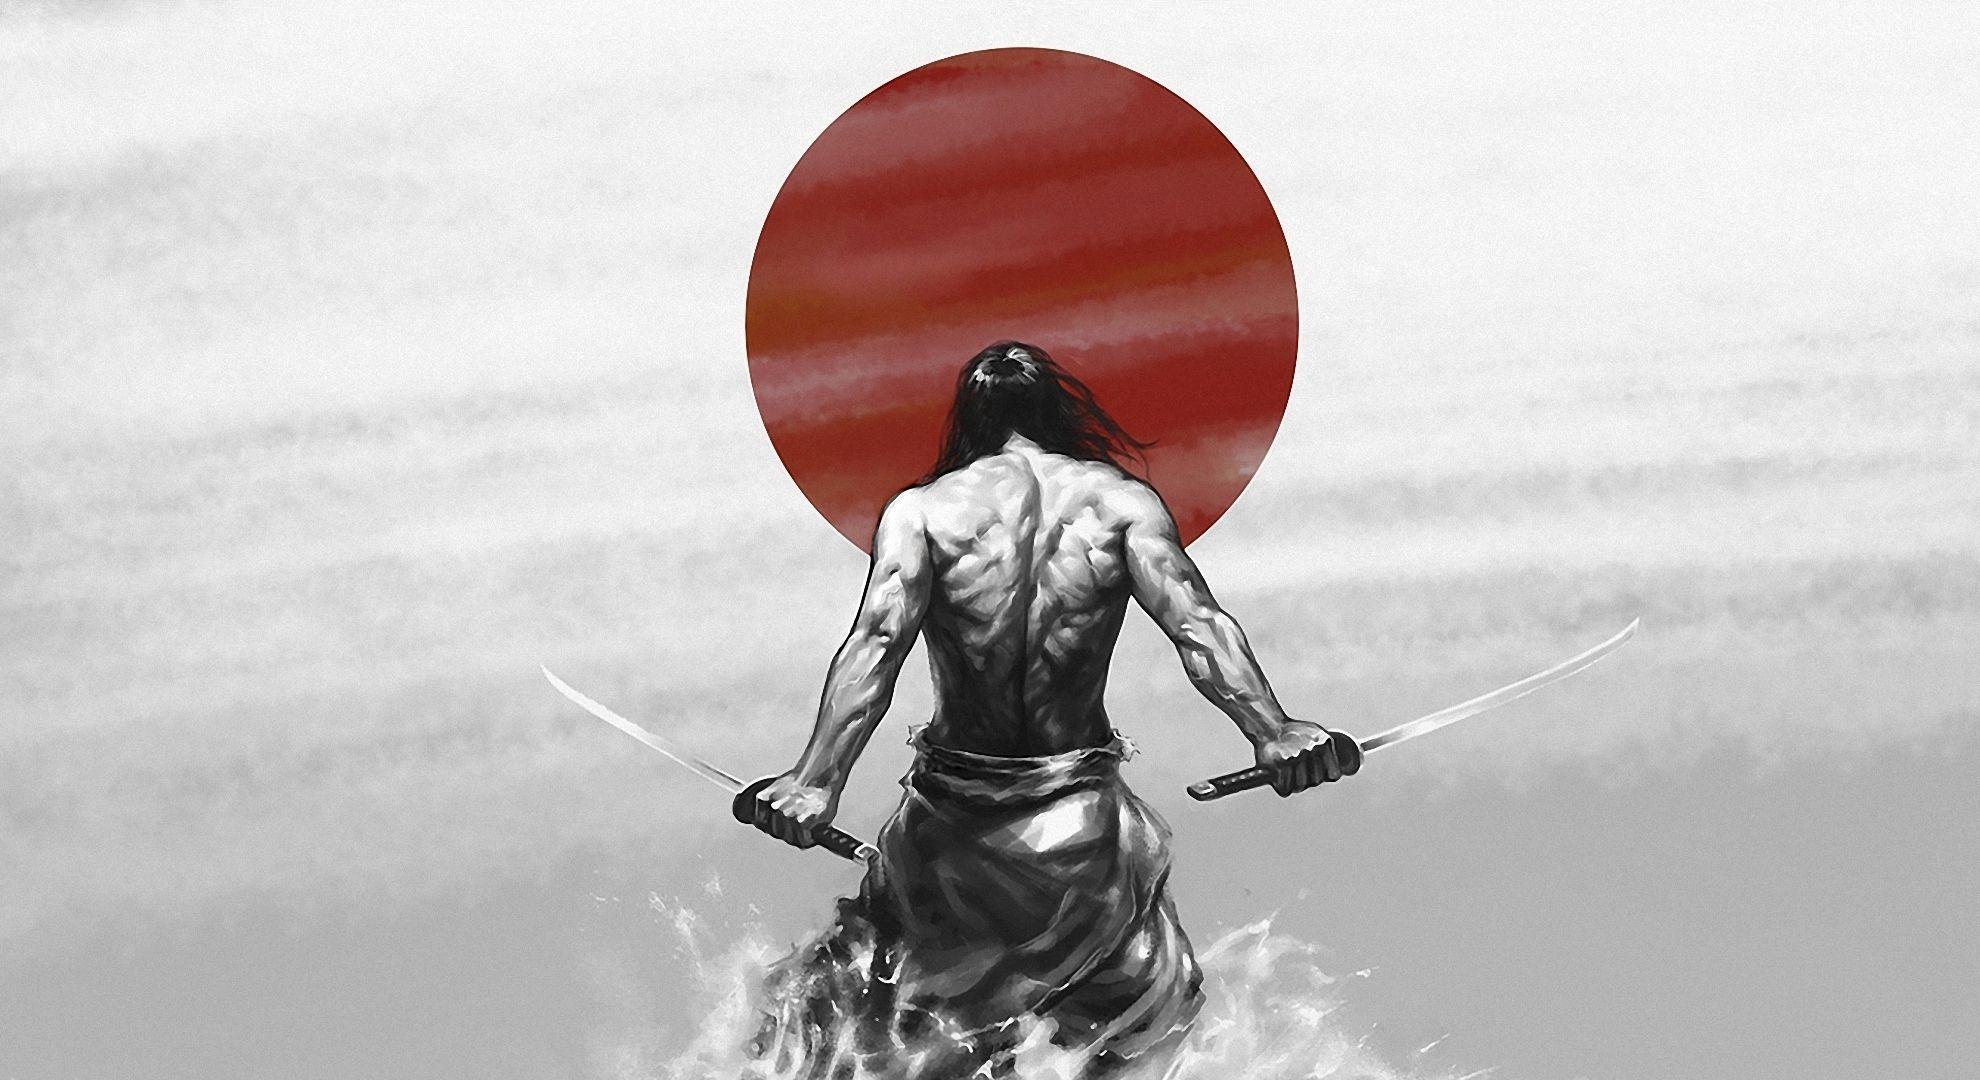 Gallery Wallpaper HD Samurai Image Collection Free Download